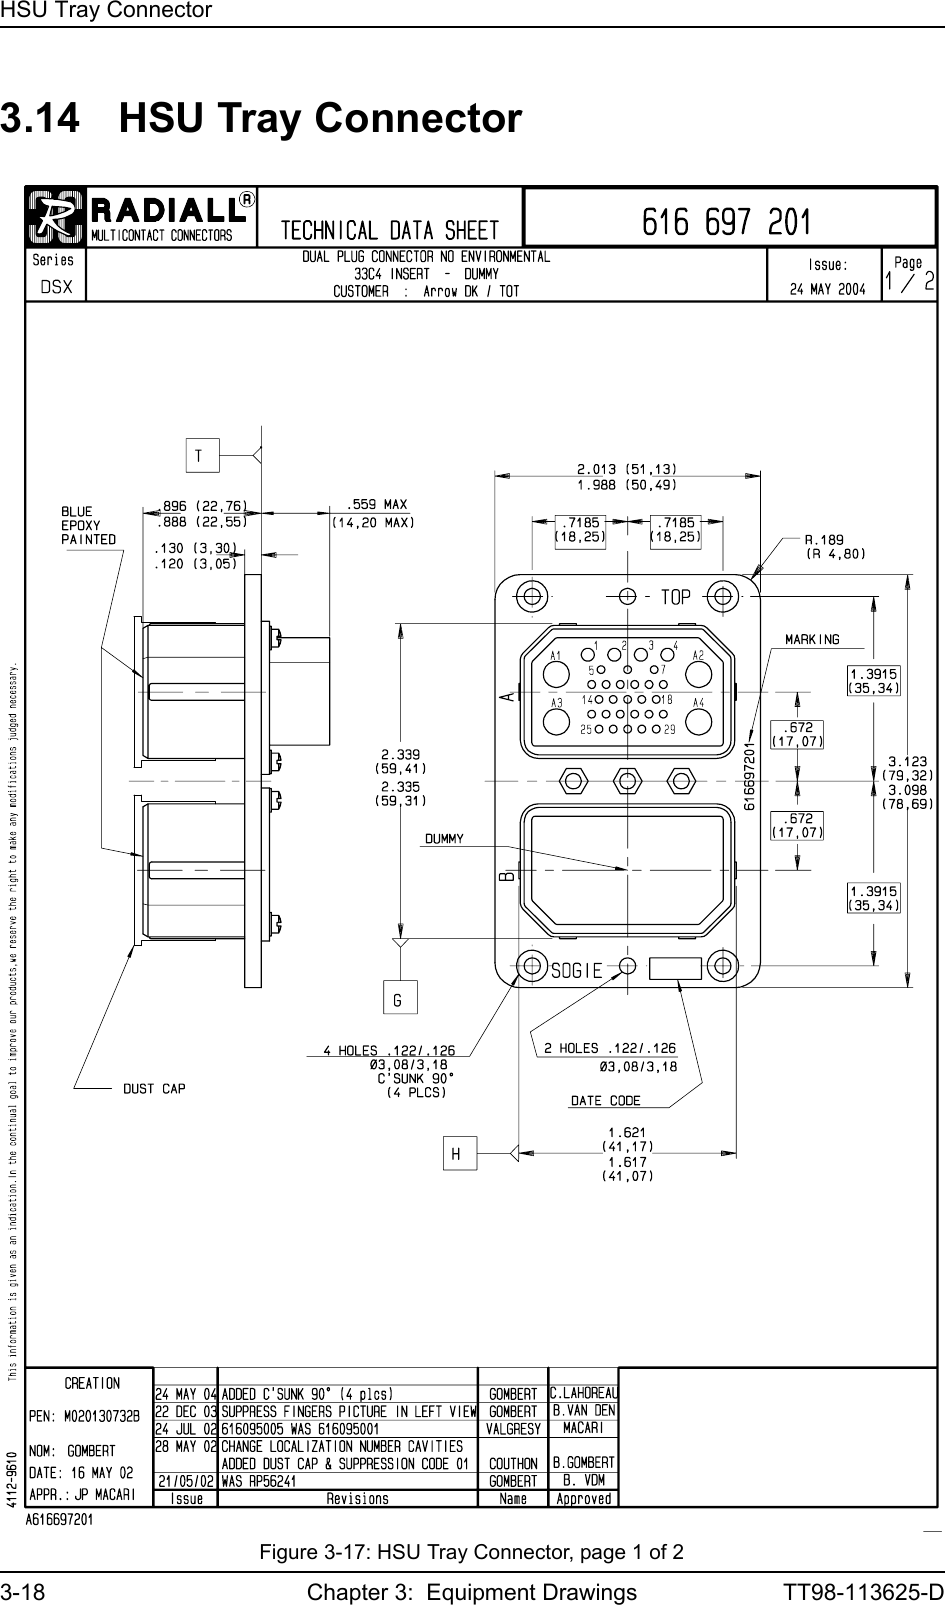 HSU Tray Connector3-18 Chapter 3:  Equipment Drawings TT98-113625-D3.14 HSU Tray ConnectorFigure 3-17: HSU Tray Connector, page 1 of 2